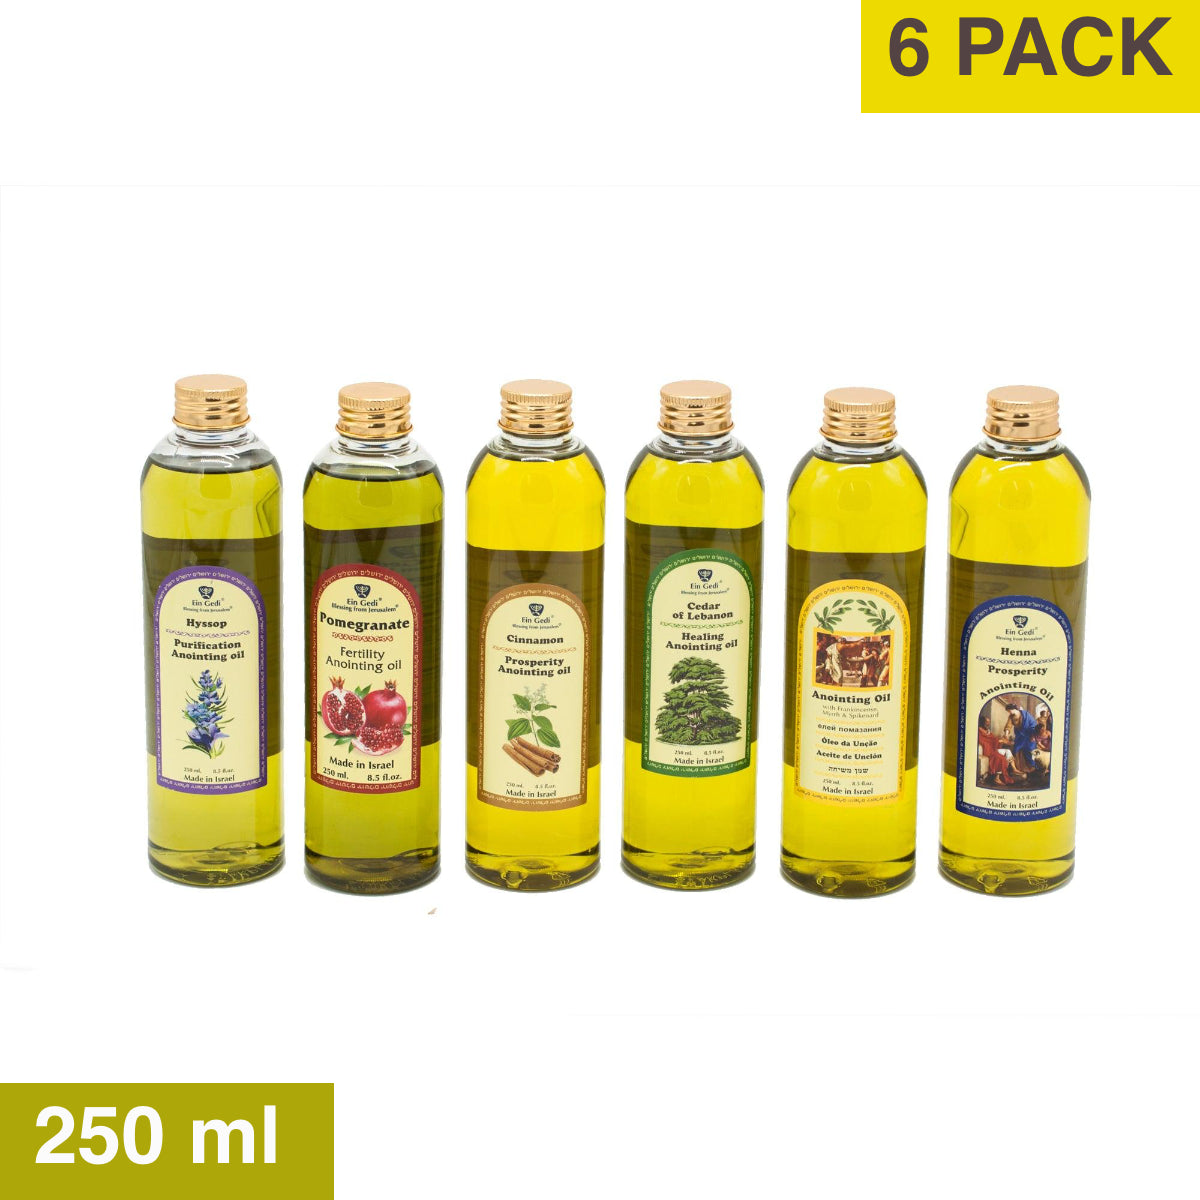 Anointing Oil Assorted 1/4 oz (Pack of 6)